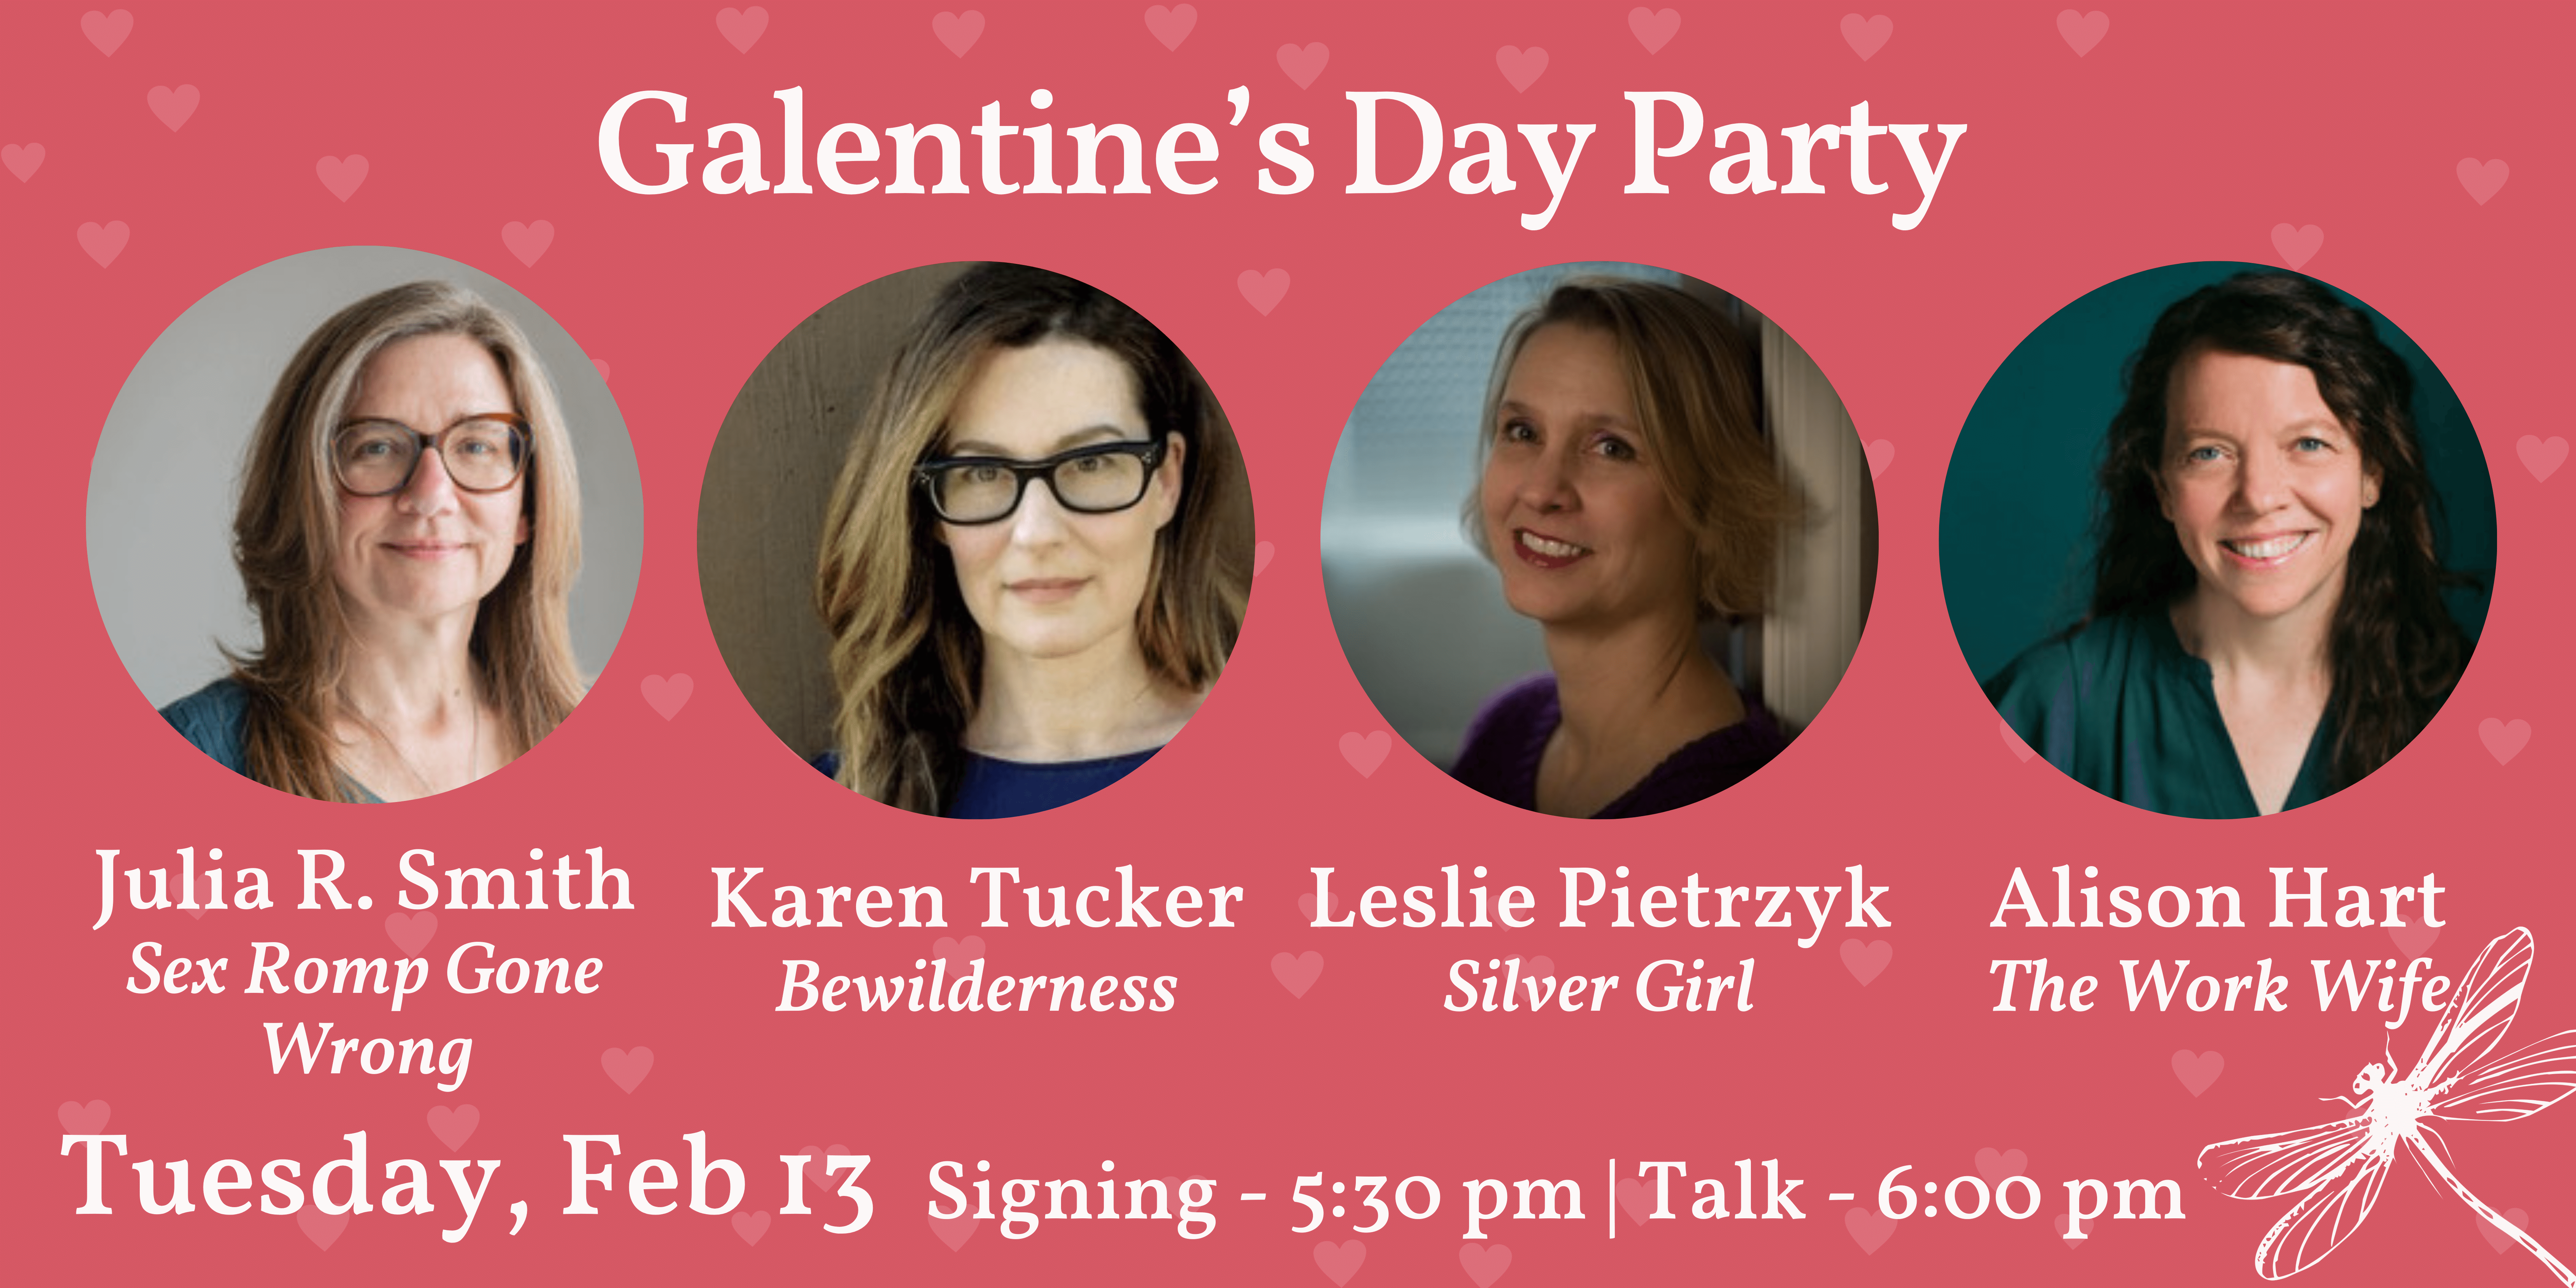 Galentine's Day Party at Flyleaf Books